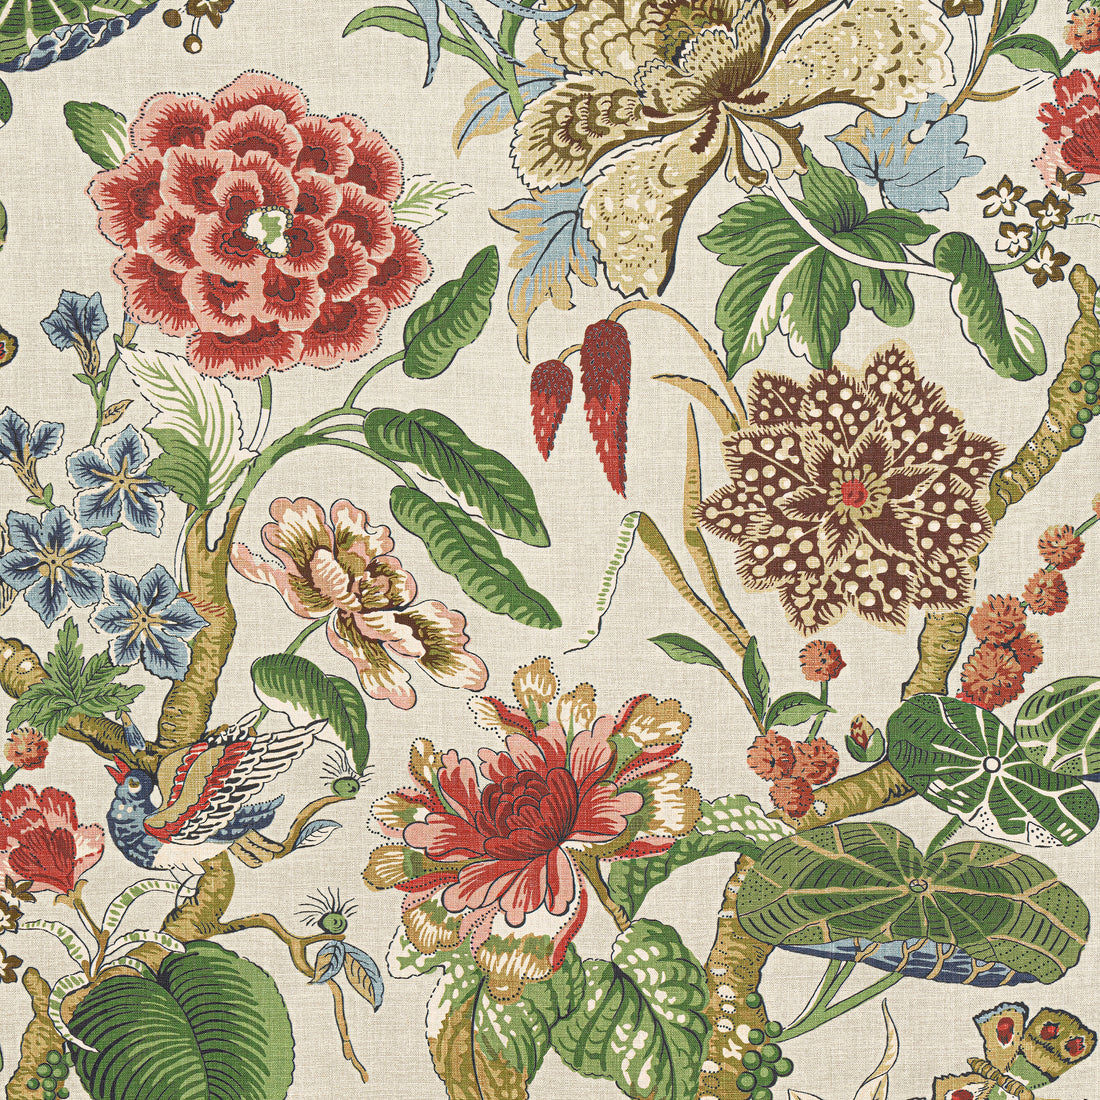 Hill Garden fabric in flax - pattern number F913657 - by Thibaut in the Grand Palace collection